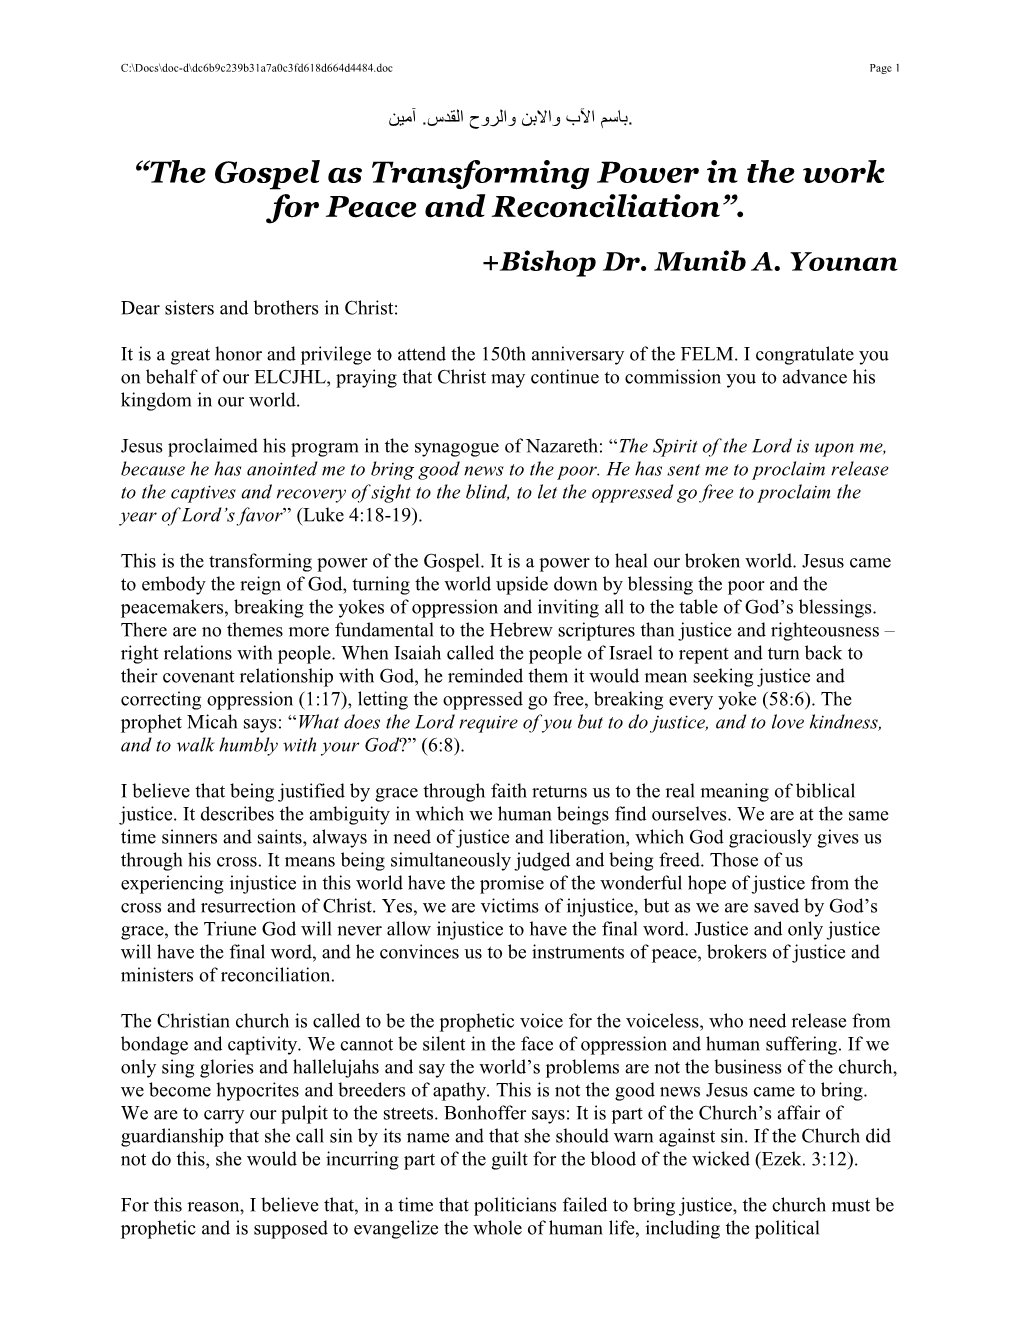 The Gospel As Transforming Power in the Work for Peace and Reconciliation